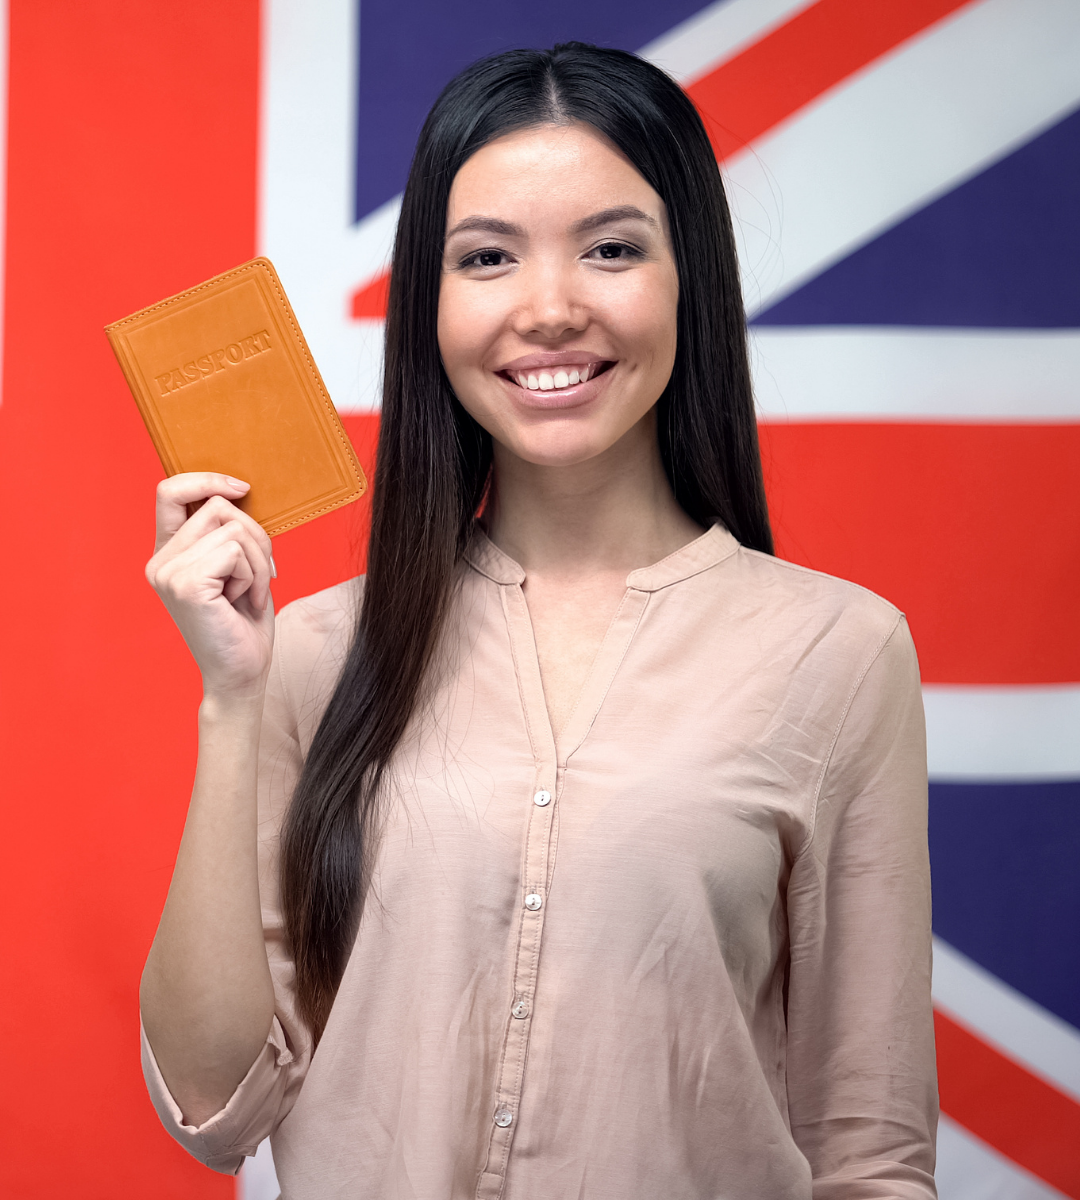 Naturalisation – How to apply for British citizenship for straightforward and complex cases